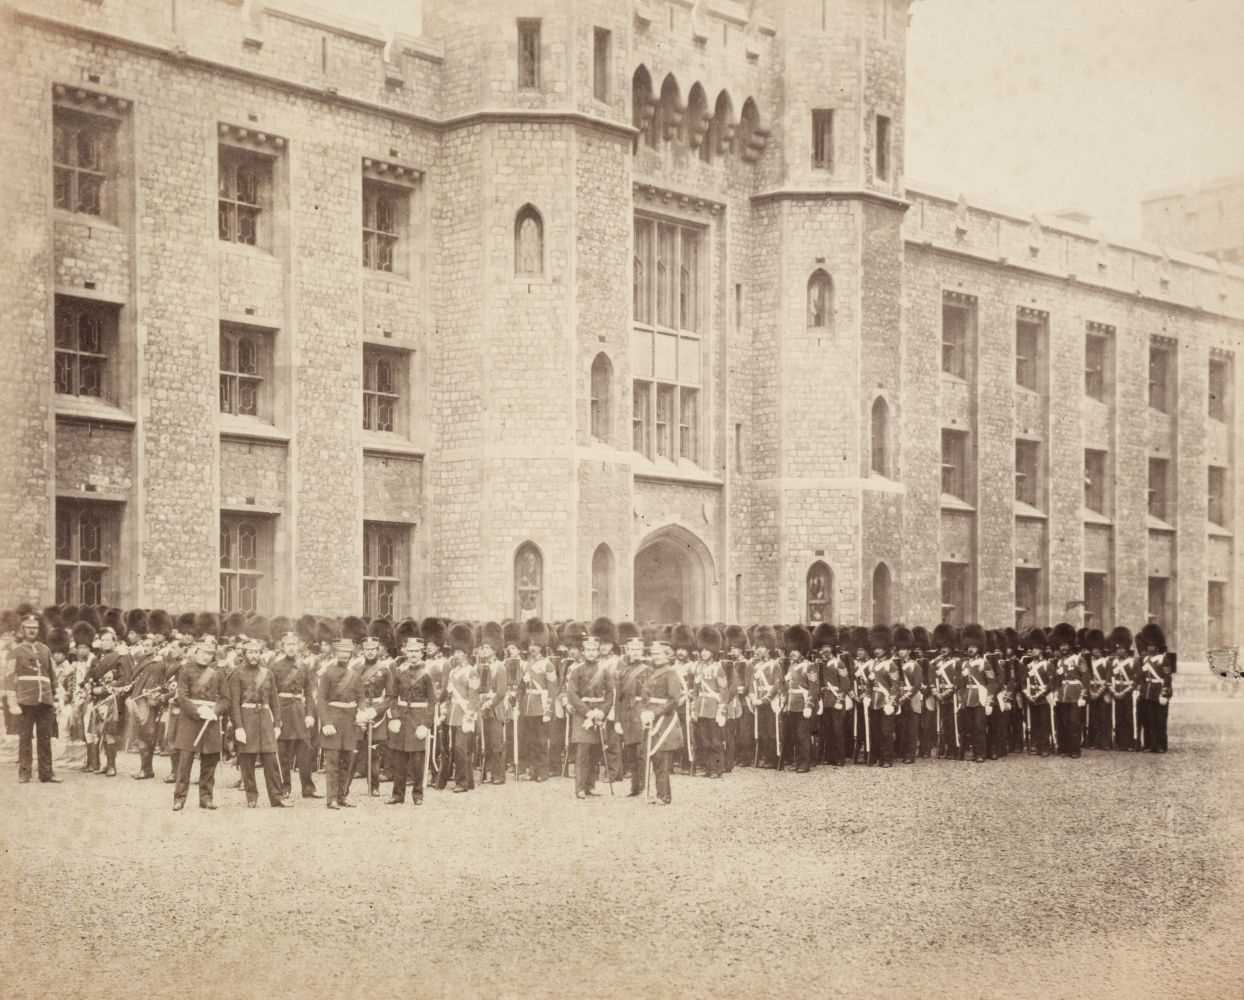 Lot 11 - Attributed to Roger Fenton (1816-1869). The Coldstream Guards outside the Tower of London